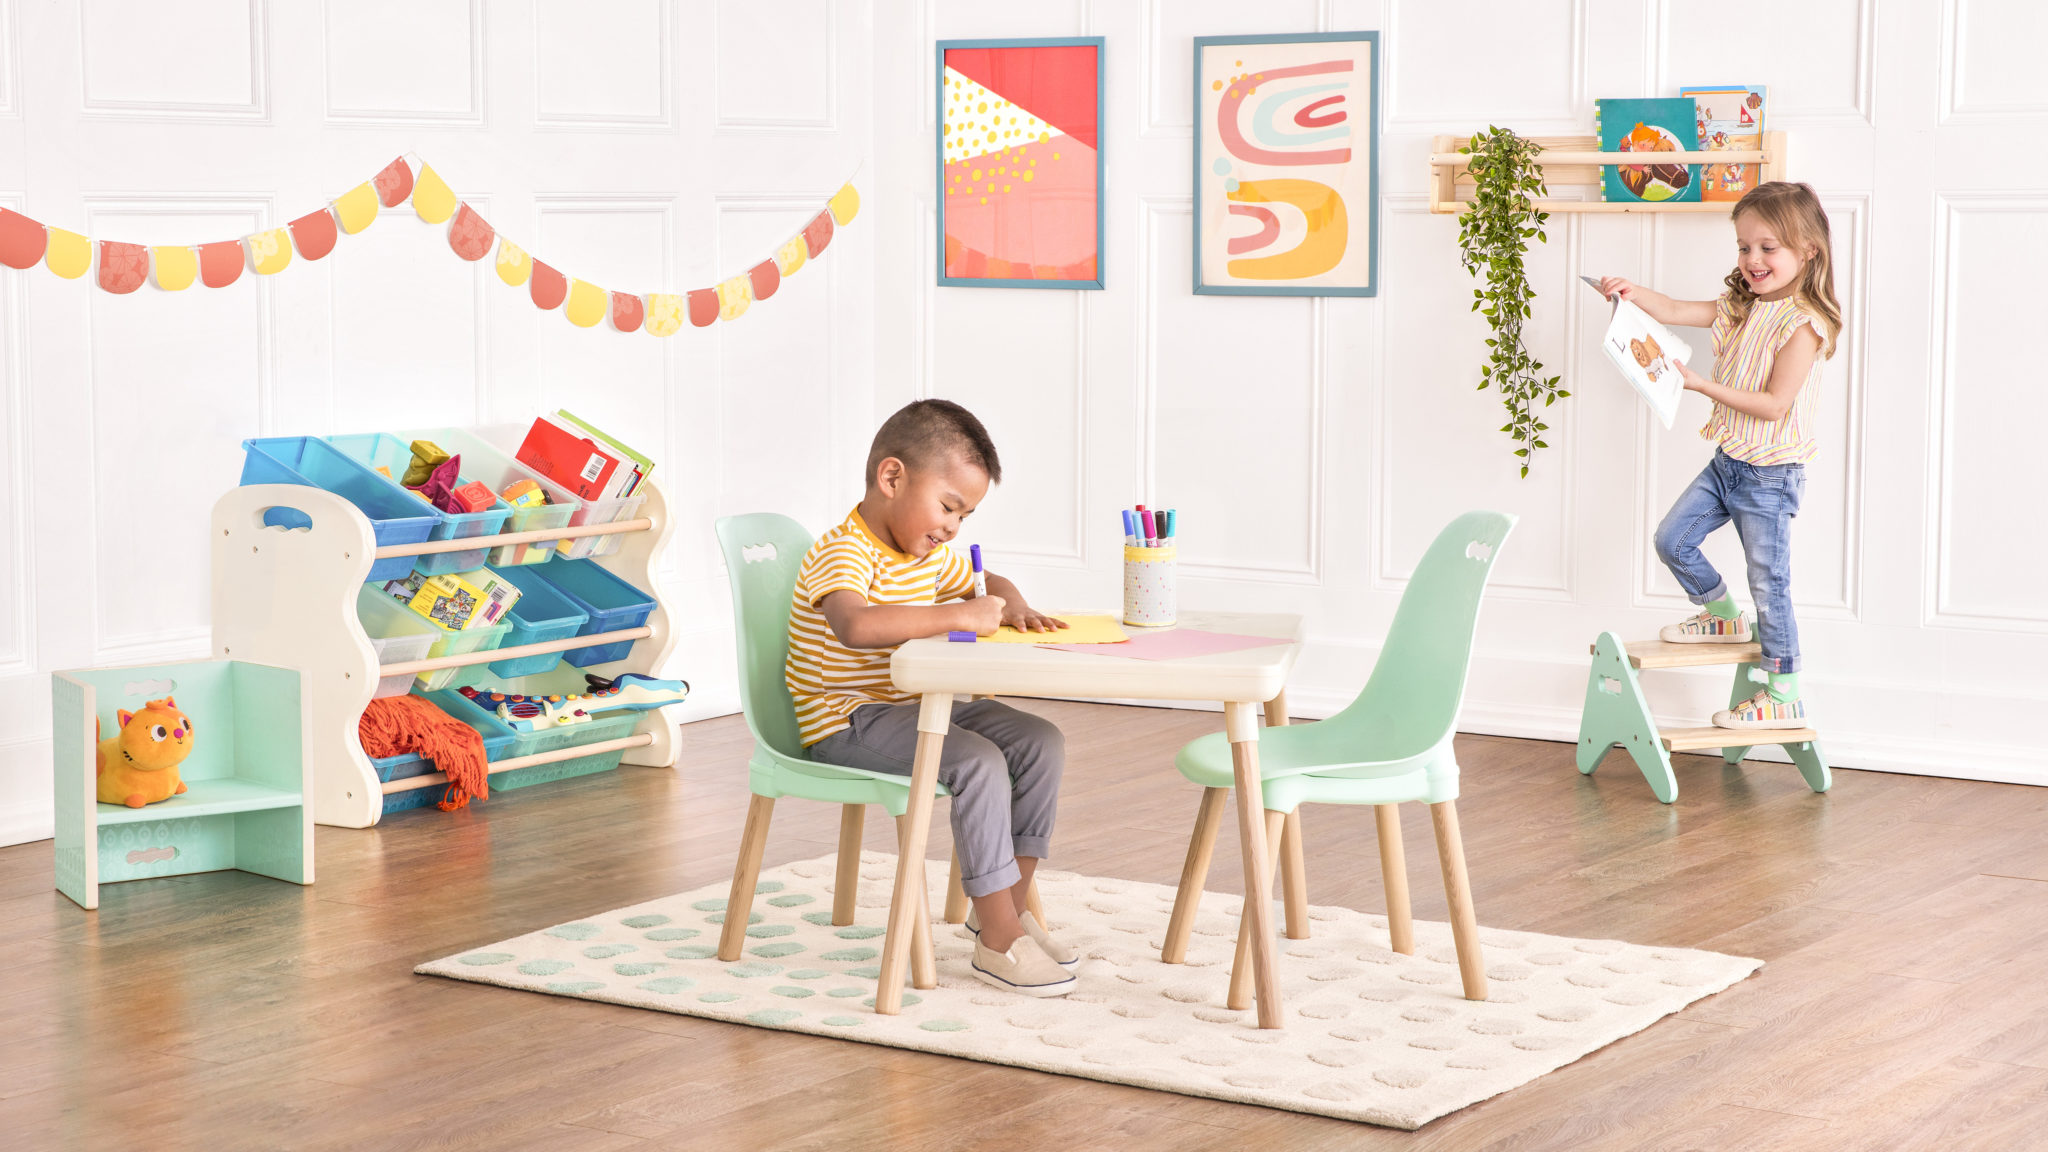 Smiling boy sitting at a kids table and drawing with markers and smiling girl holding a drawing while standing on a kids step stool.